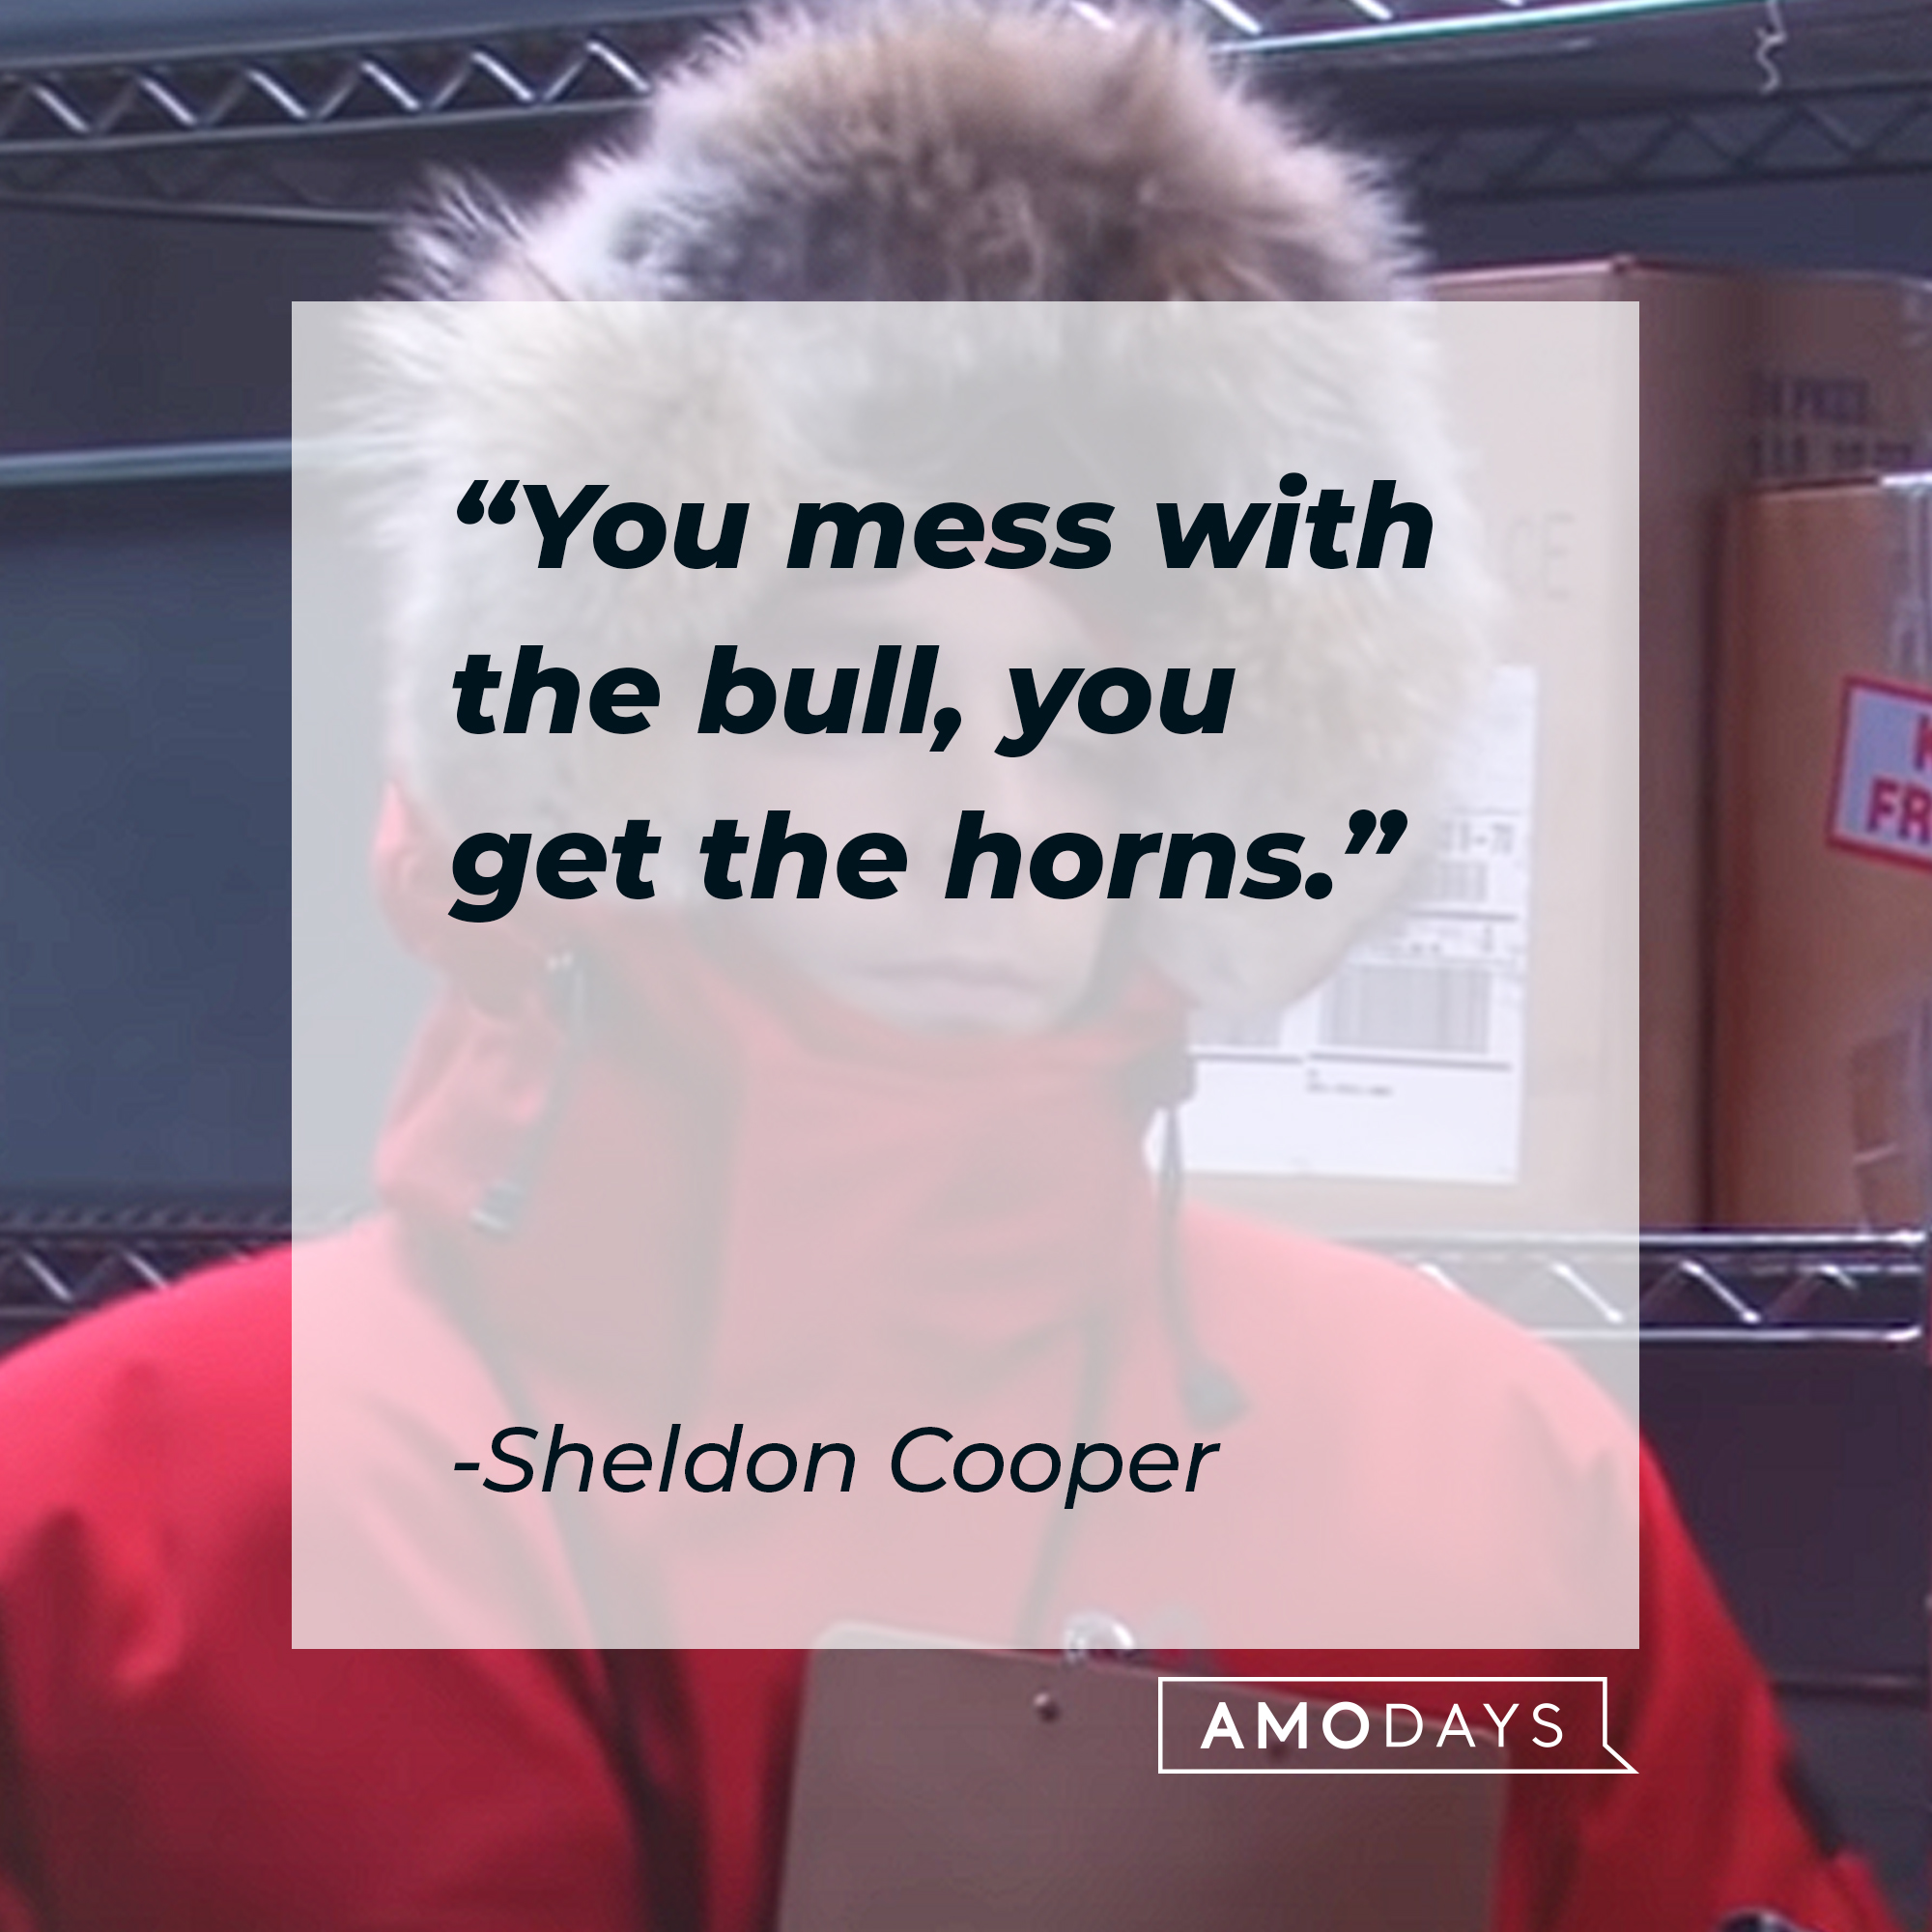 Sheldon Cooper's quote: "You mess with the bull, you get the horns." | Source: youtube.com/warnerbrostv